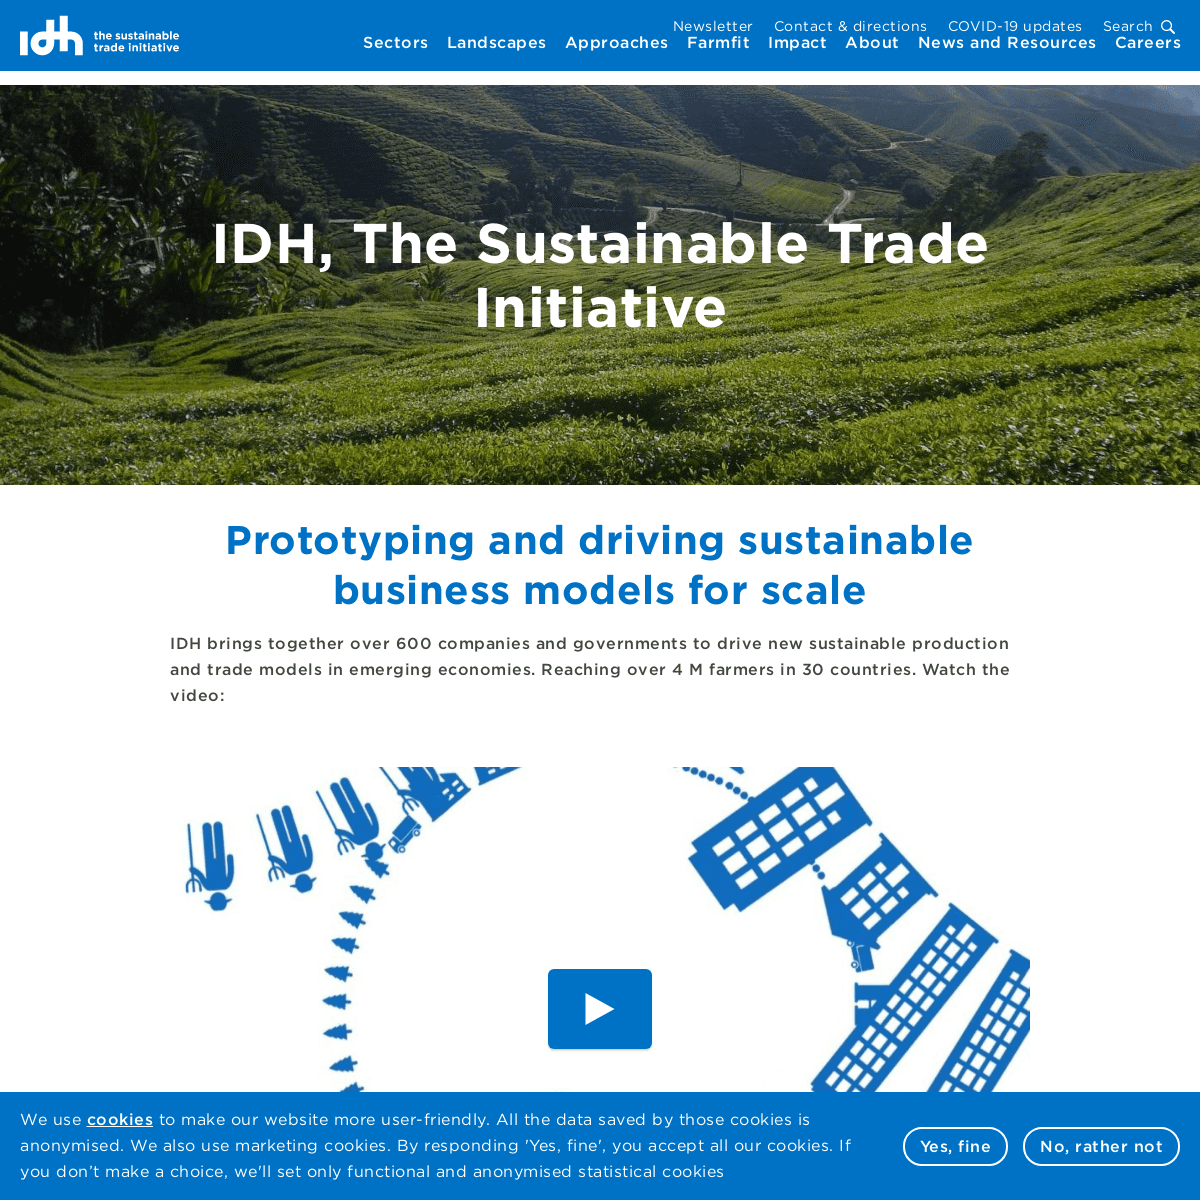 A complete backup of https://idhsustainabletrade.com